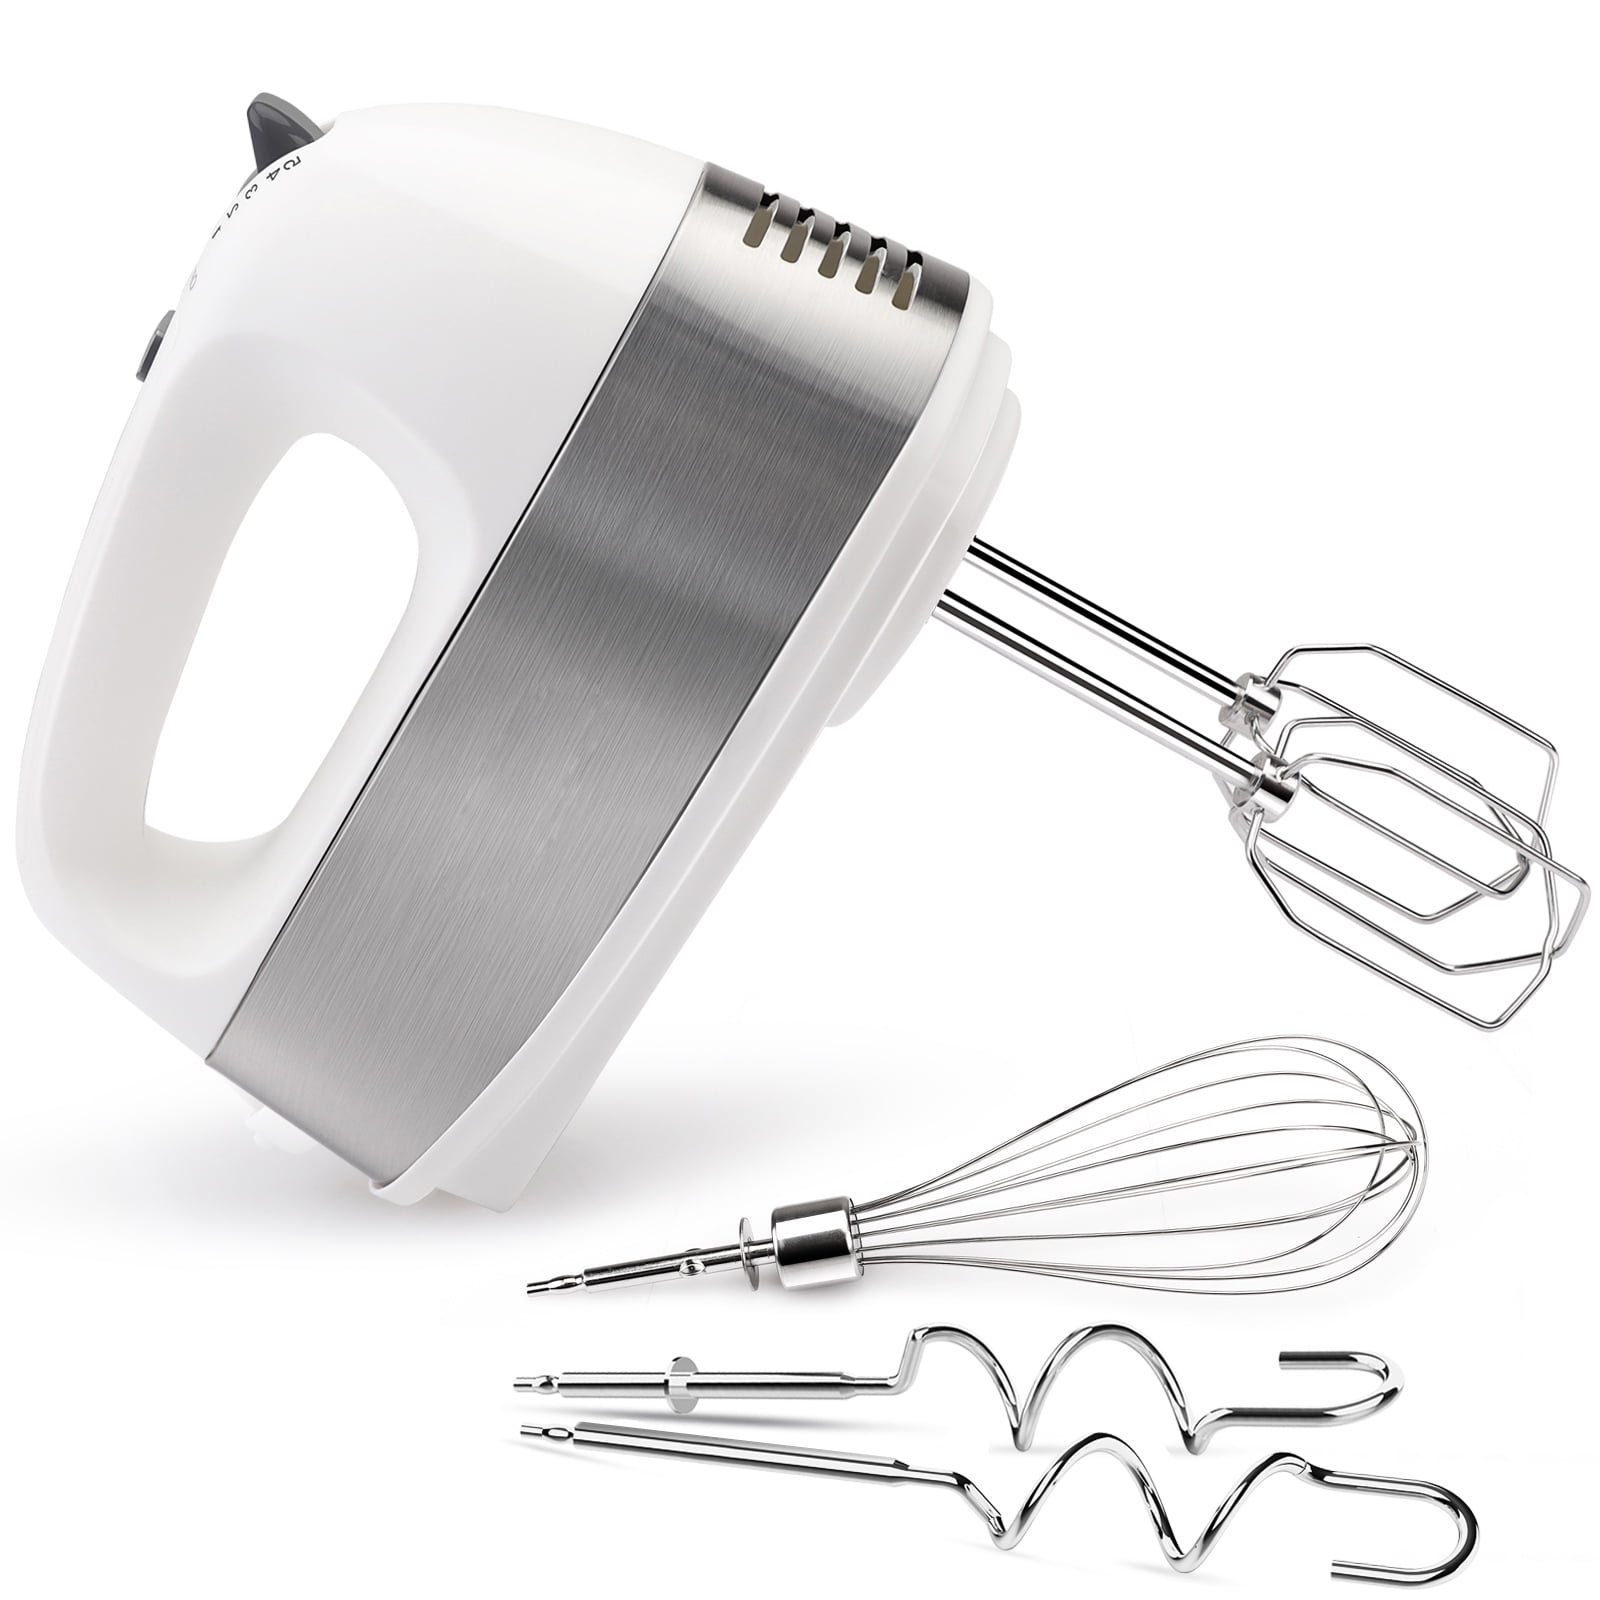 5 Speed 400W Turbo with 5 Stainless Steel Accessories for Easy Whipping Cakes and Dough Batters Mixing Cookies Brownies Liraip Electric Hand Mixer 